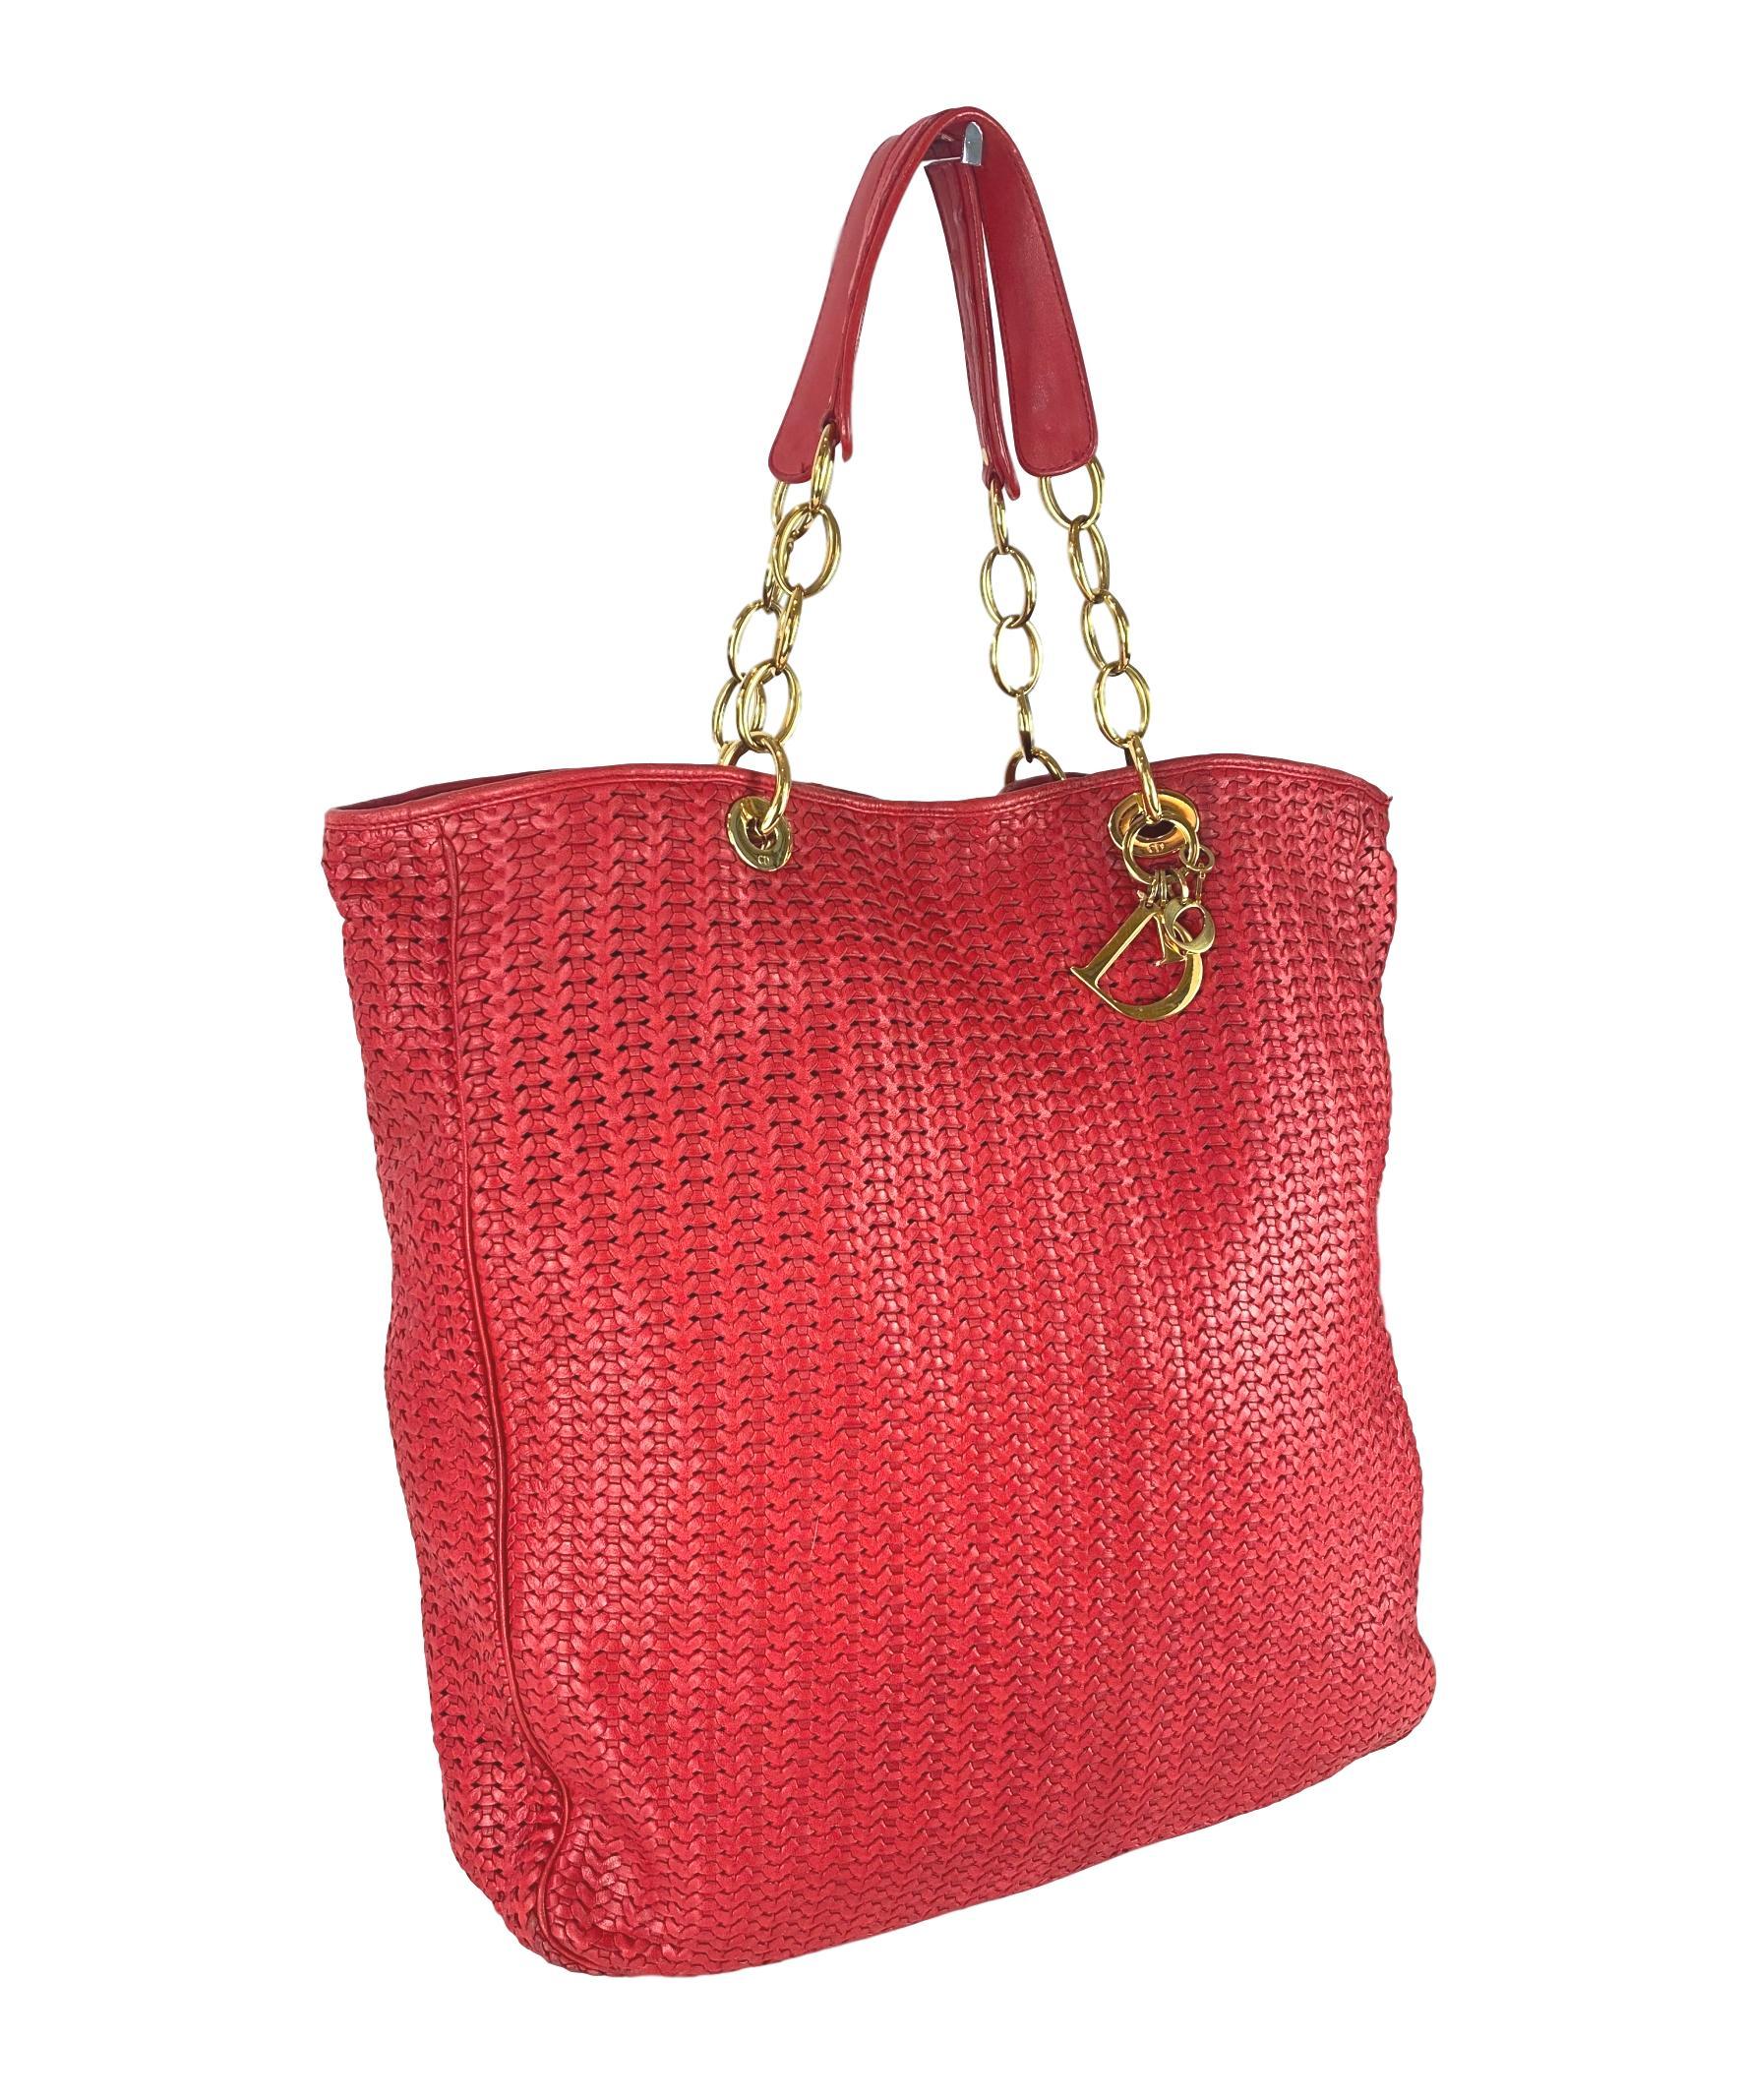 Christian Dior Red Woven Leather Soft Large Tote Bag, Italy 2008. This incredibly stylish and versatile 